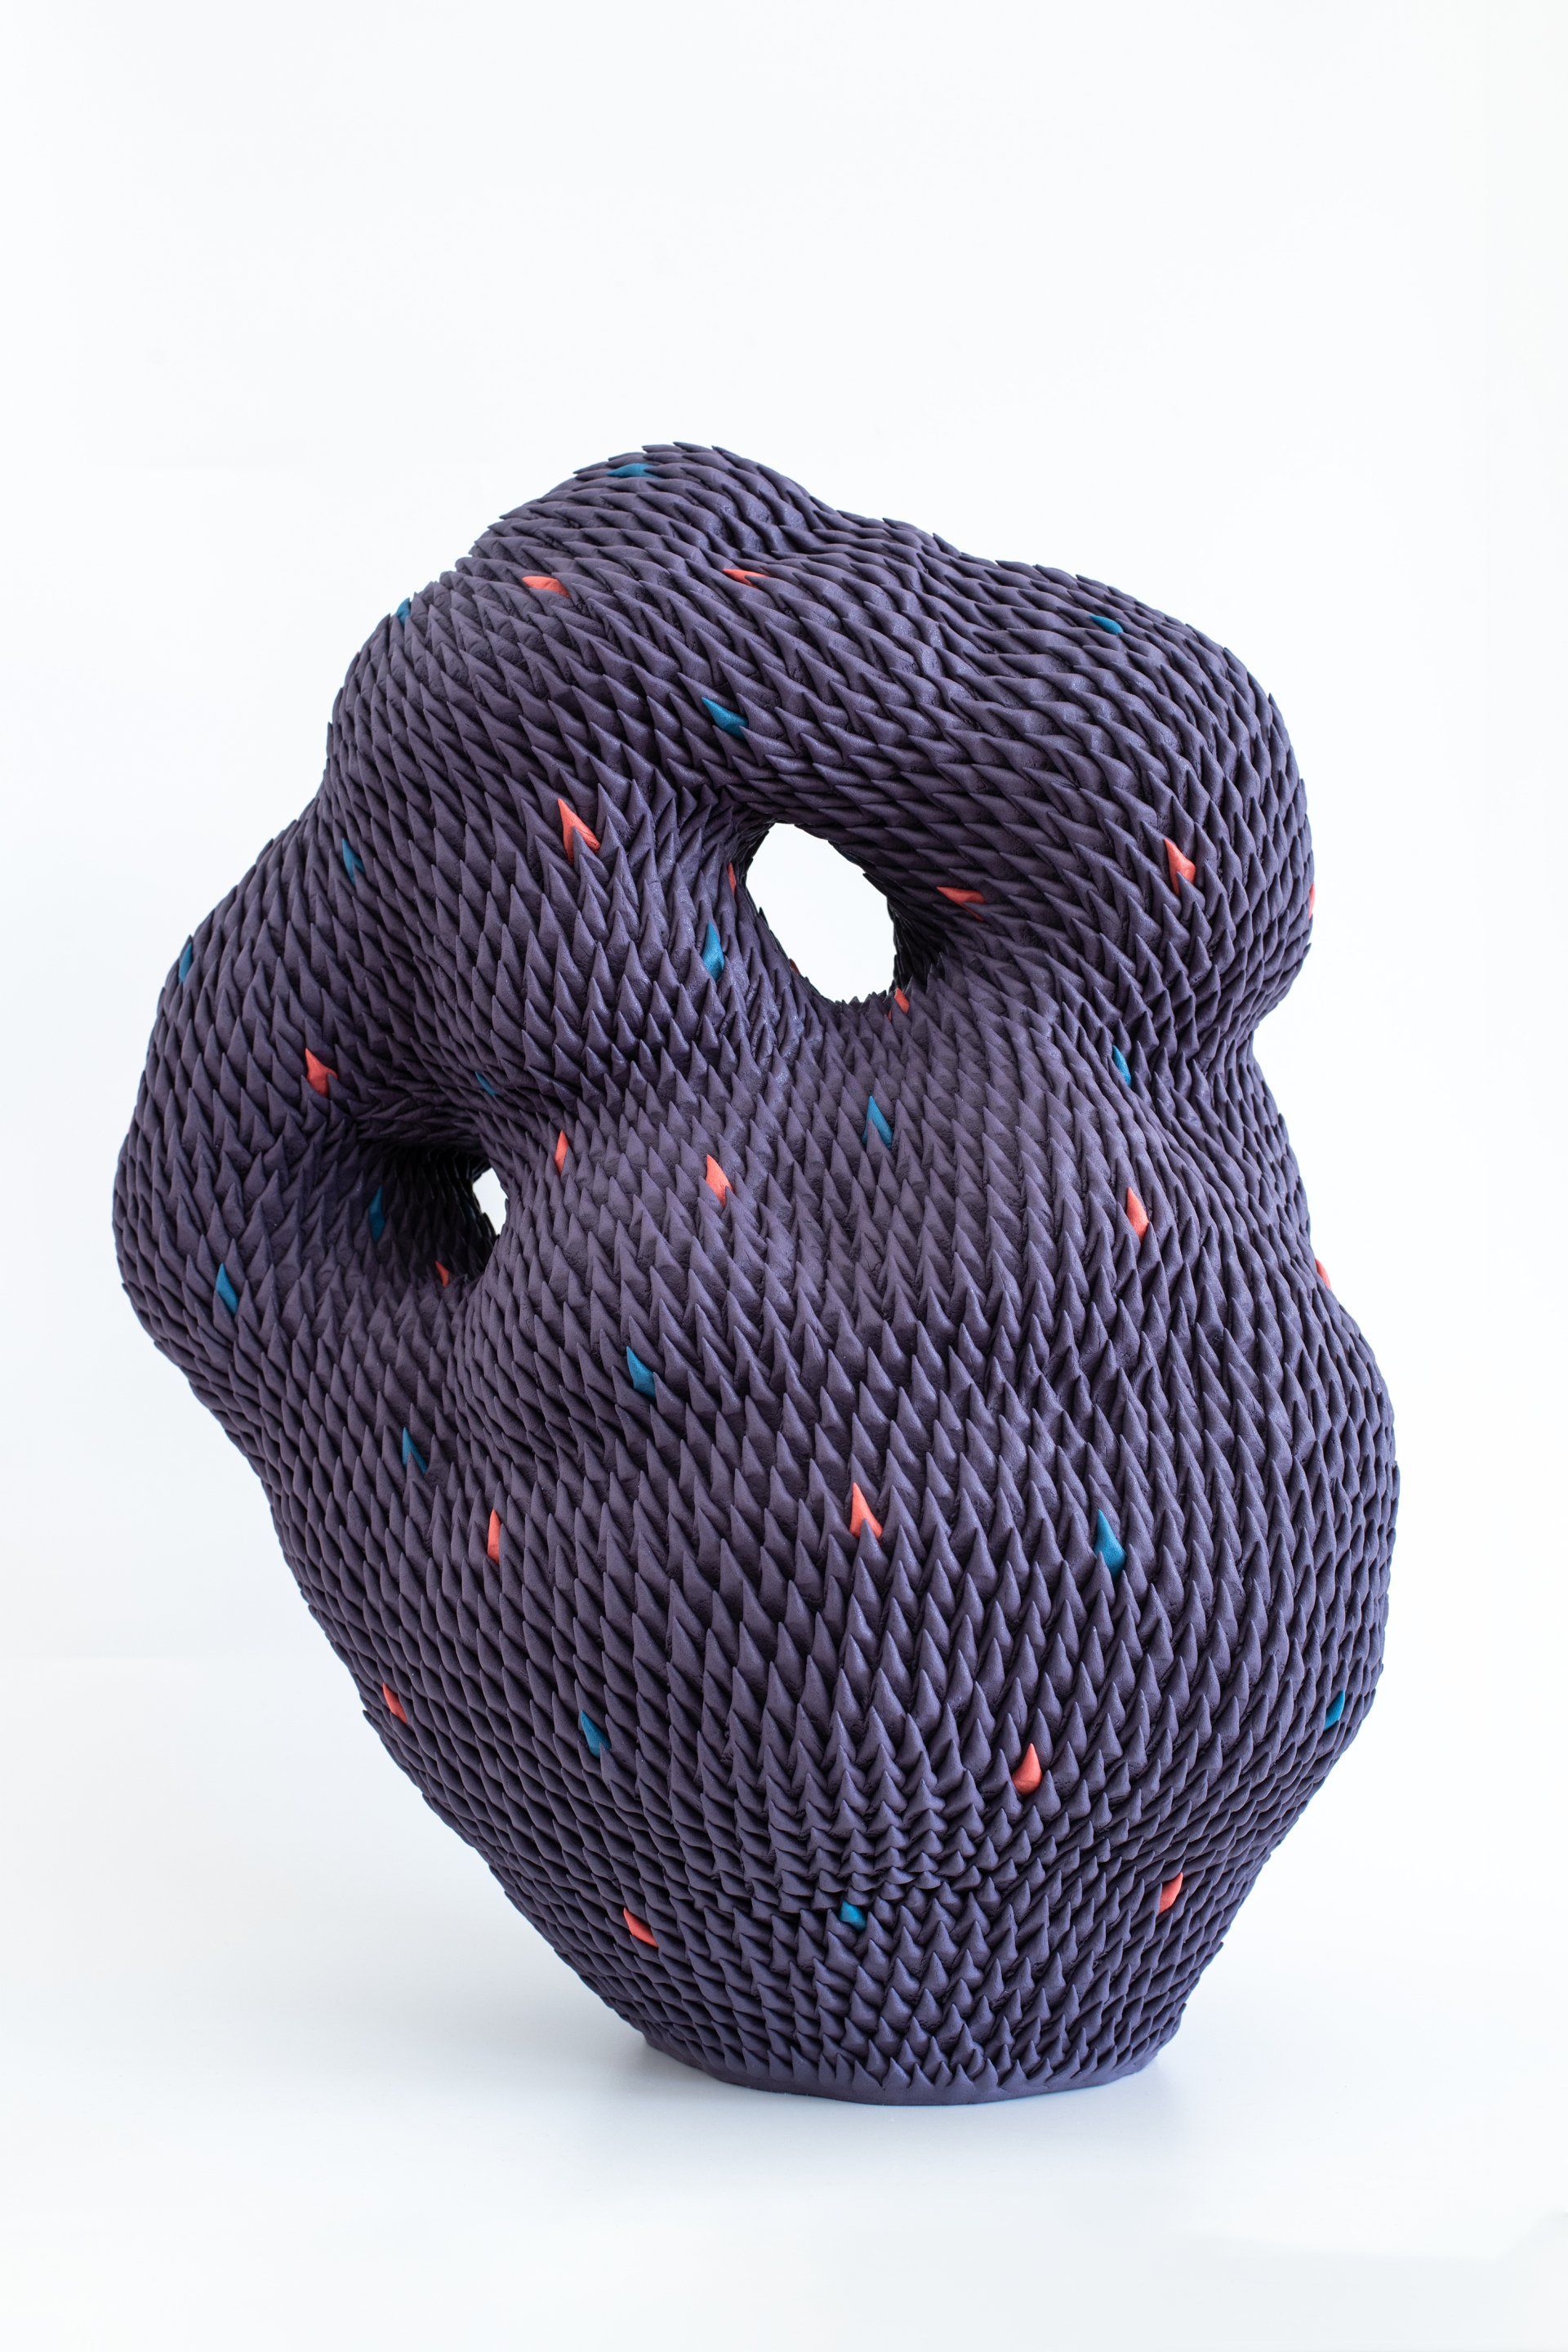 Ceramic sculpture by Japanese artist Sayuri Ikake. This purple work is made up of small spikes applied one by one. With a complex and rounded shape, it features openwork parts.